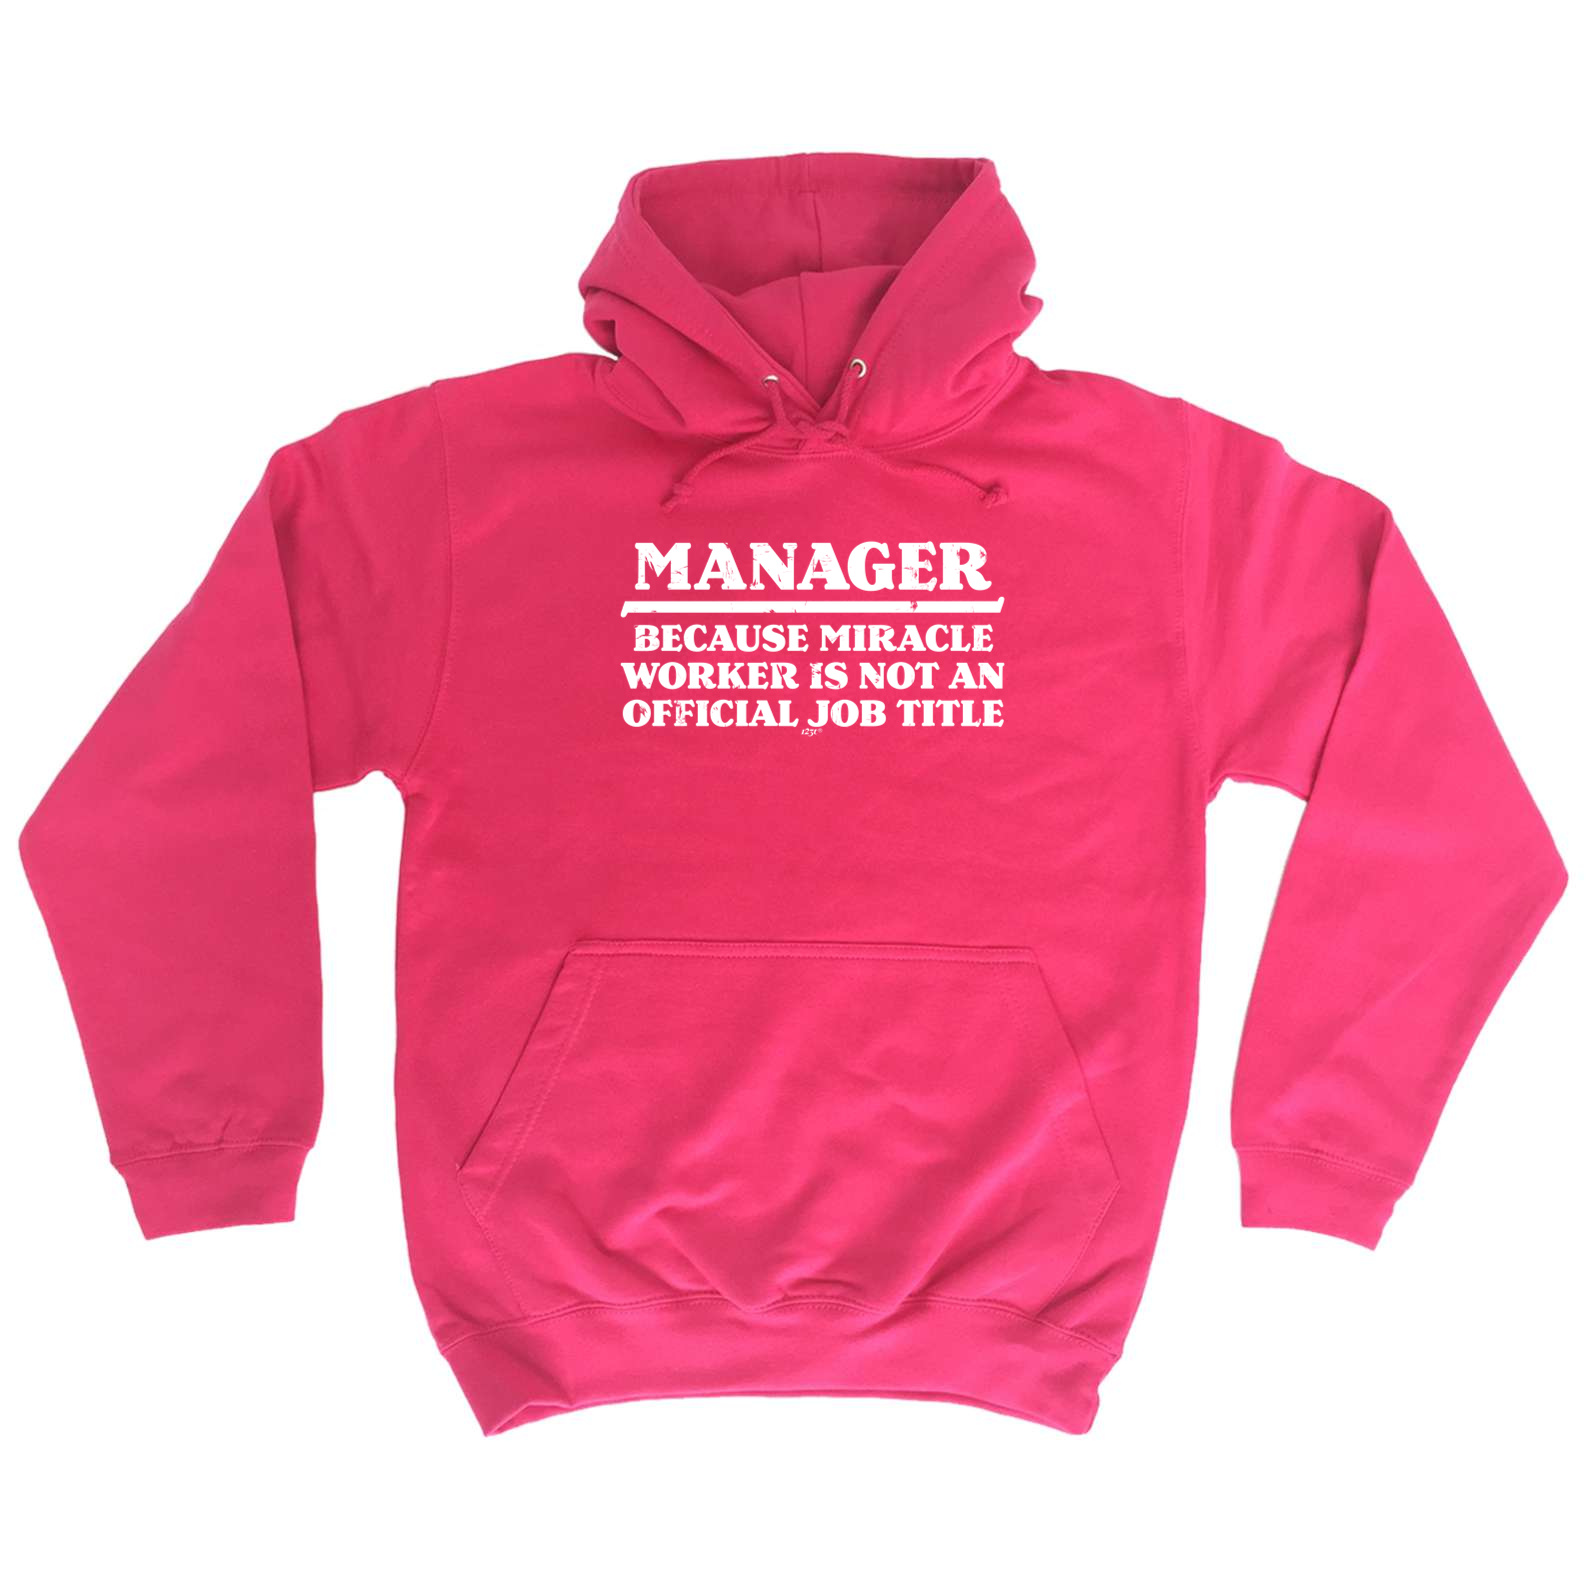 MANAGER BECAUSE MIRACLE WORKER HOODIE boss hoody funny birthday gift present 